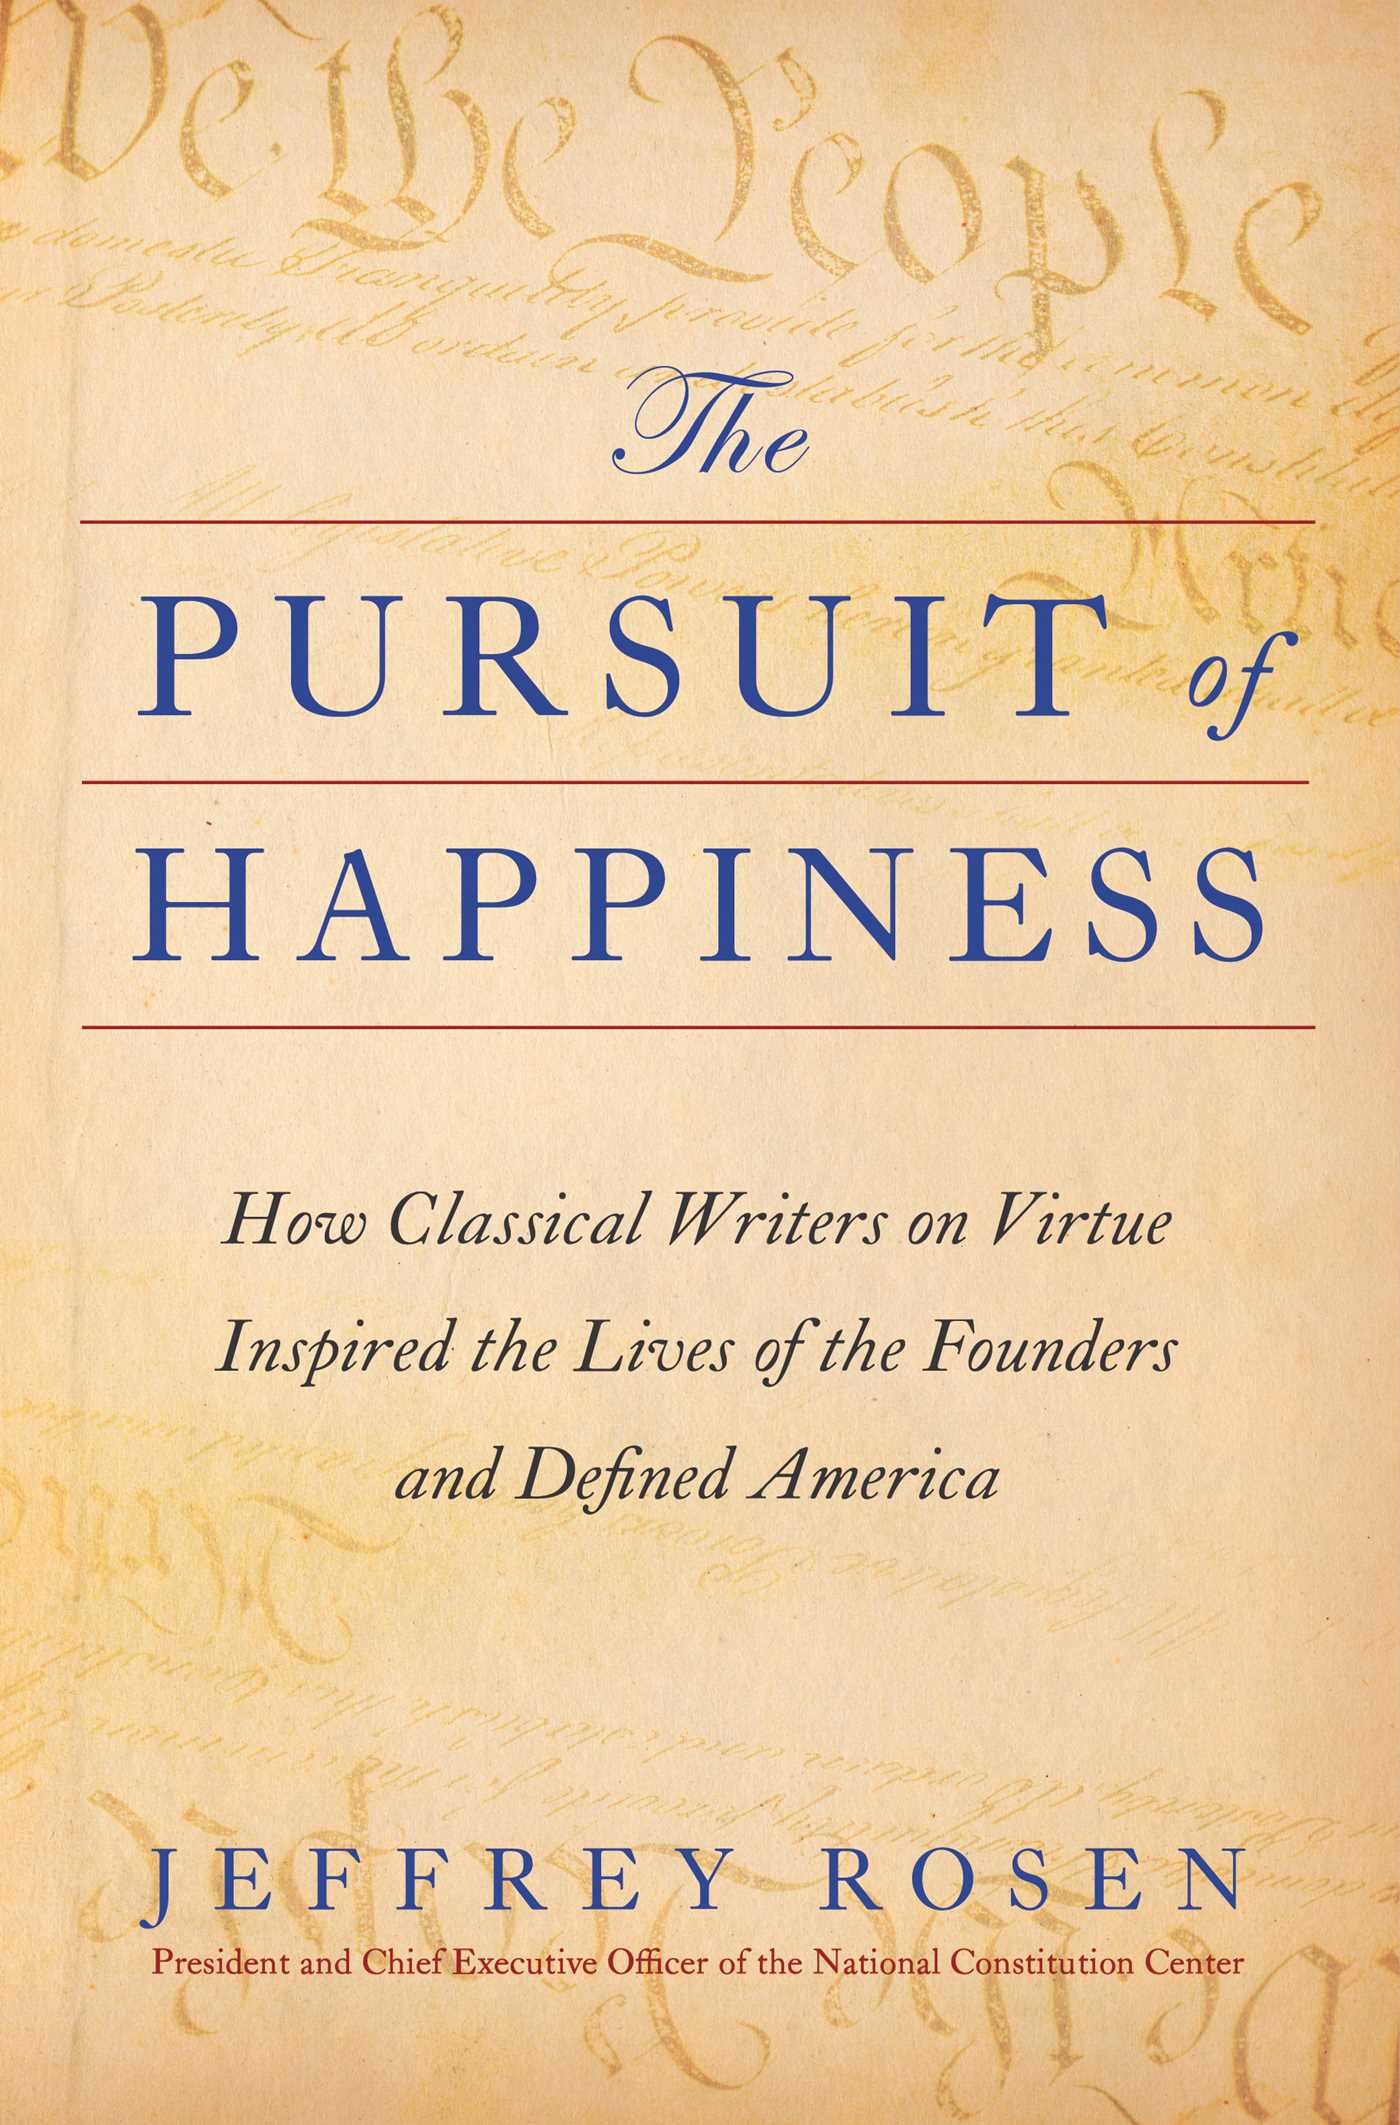 Image for "The Pursuit of Happiness"